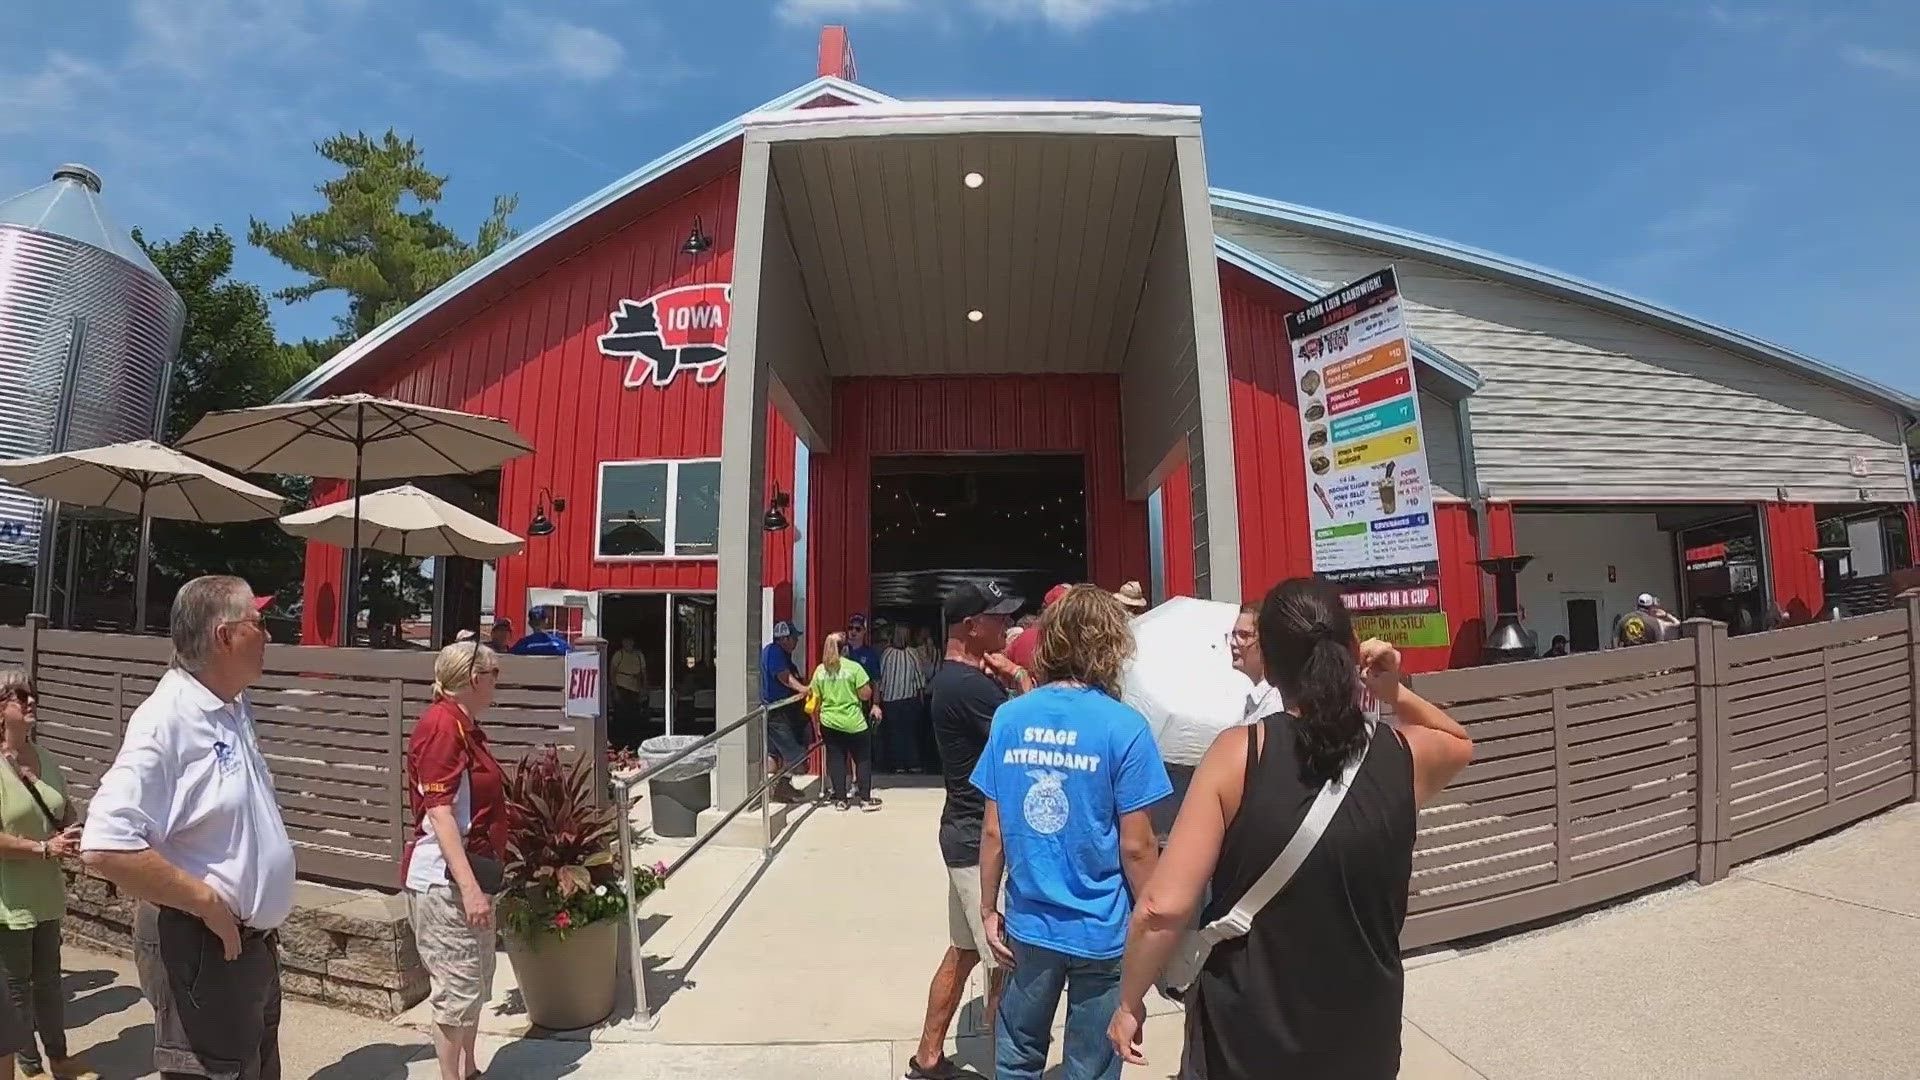 The classic Iowa State Fair attraction is showing off a new and improved look on the 2023 opening day.